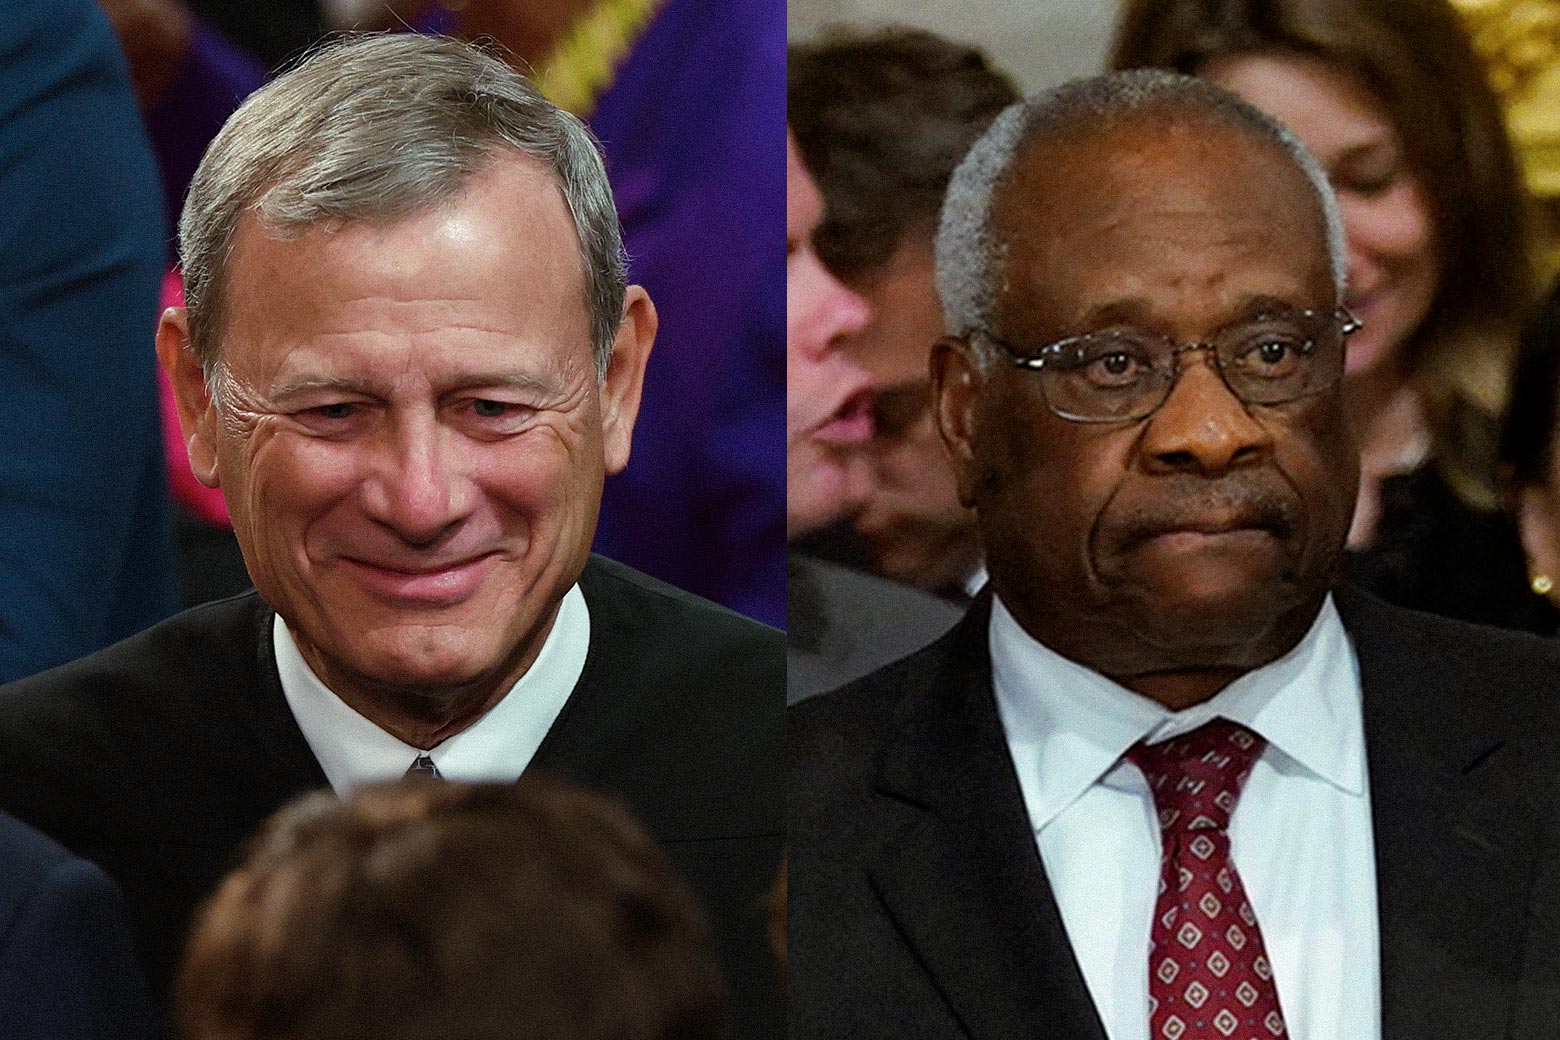 There’s Finally a Clarence Thomas Ethics Inquiry Underway, but Will It Go Anywhere? Dennis Aftergut and Austin Sarat